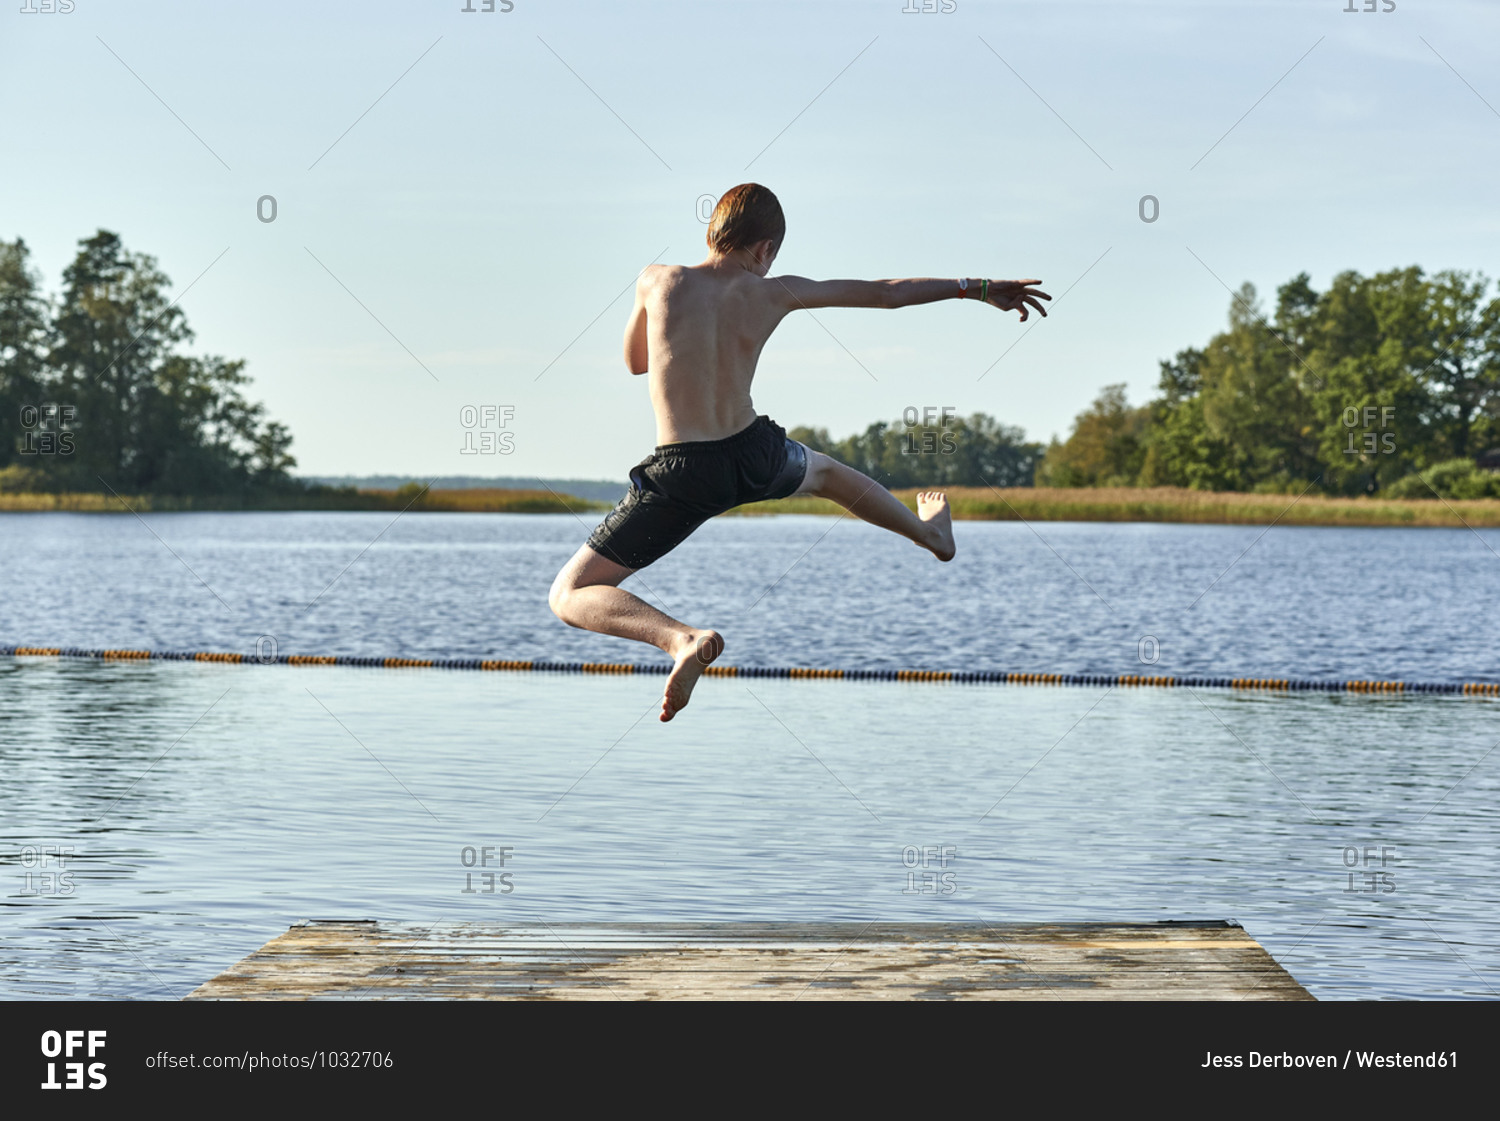 Redhead boy jumping into lake against clear sky